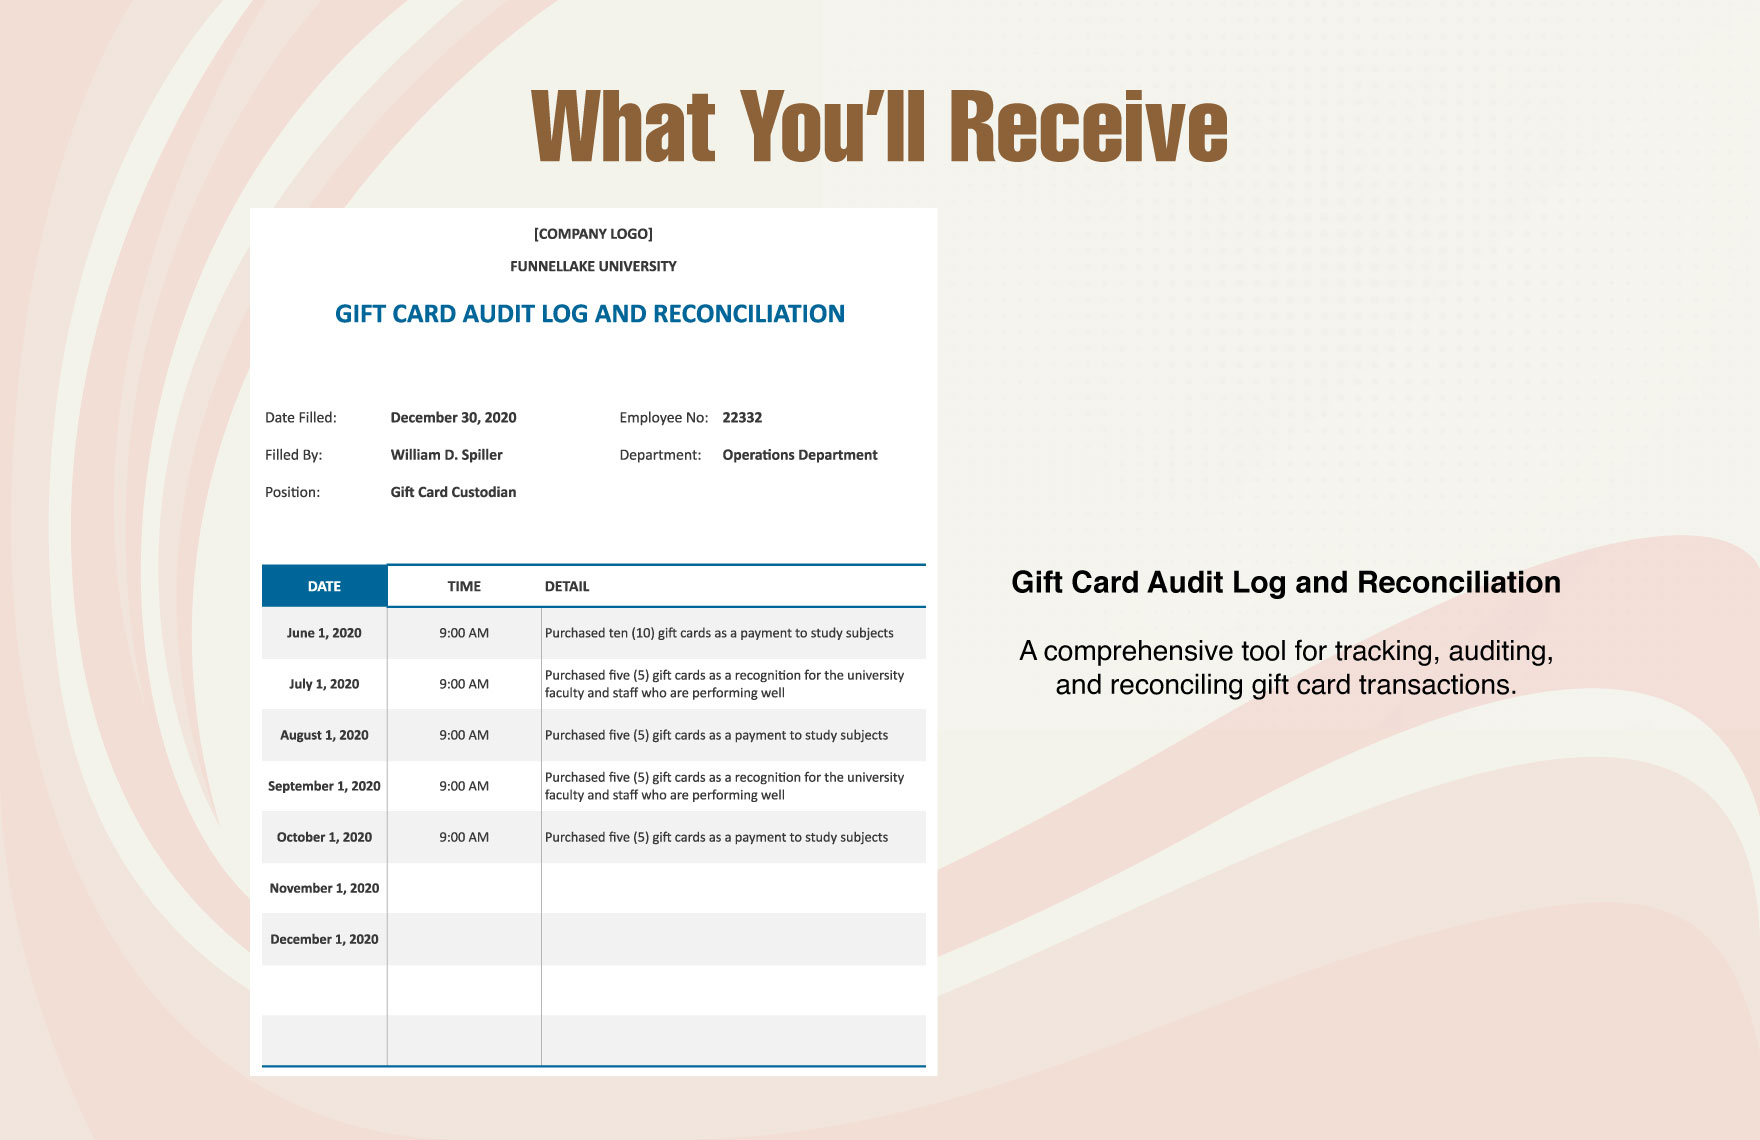 Gift Card Audit Log & Reconciliation Template